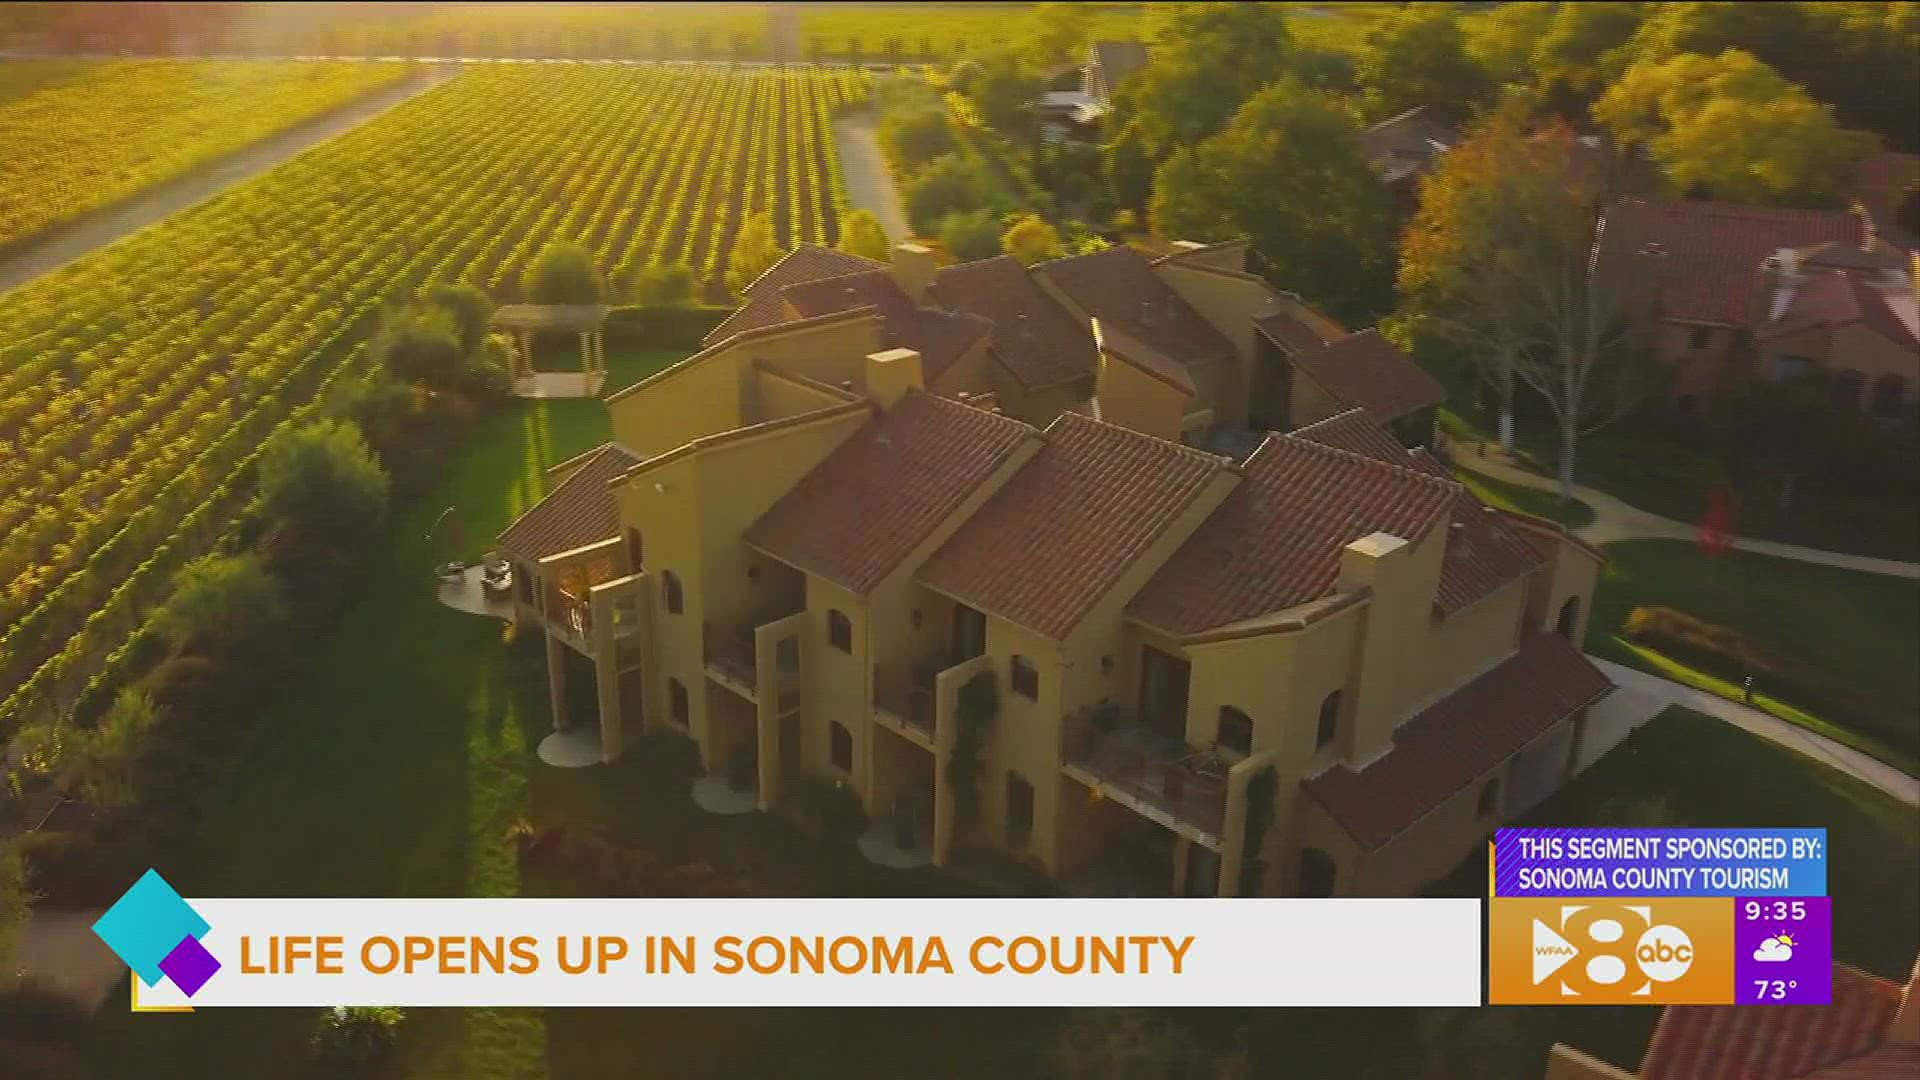 This segment is sponsored by Sonoma County Tourism